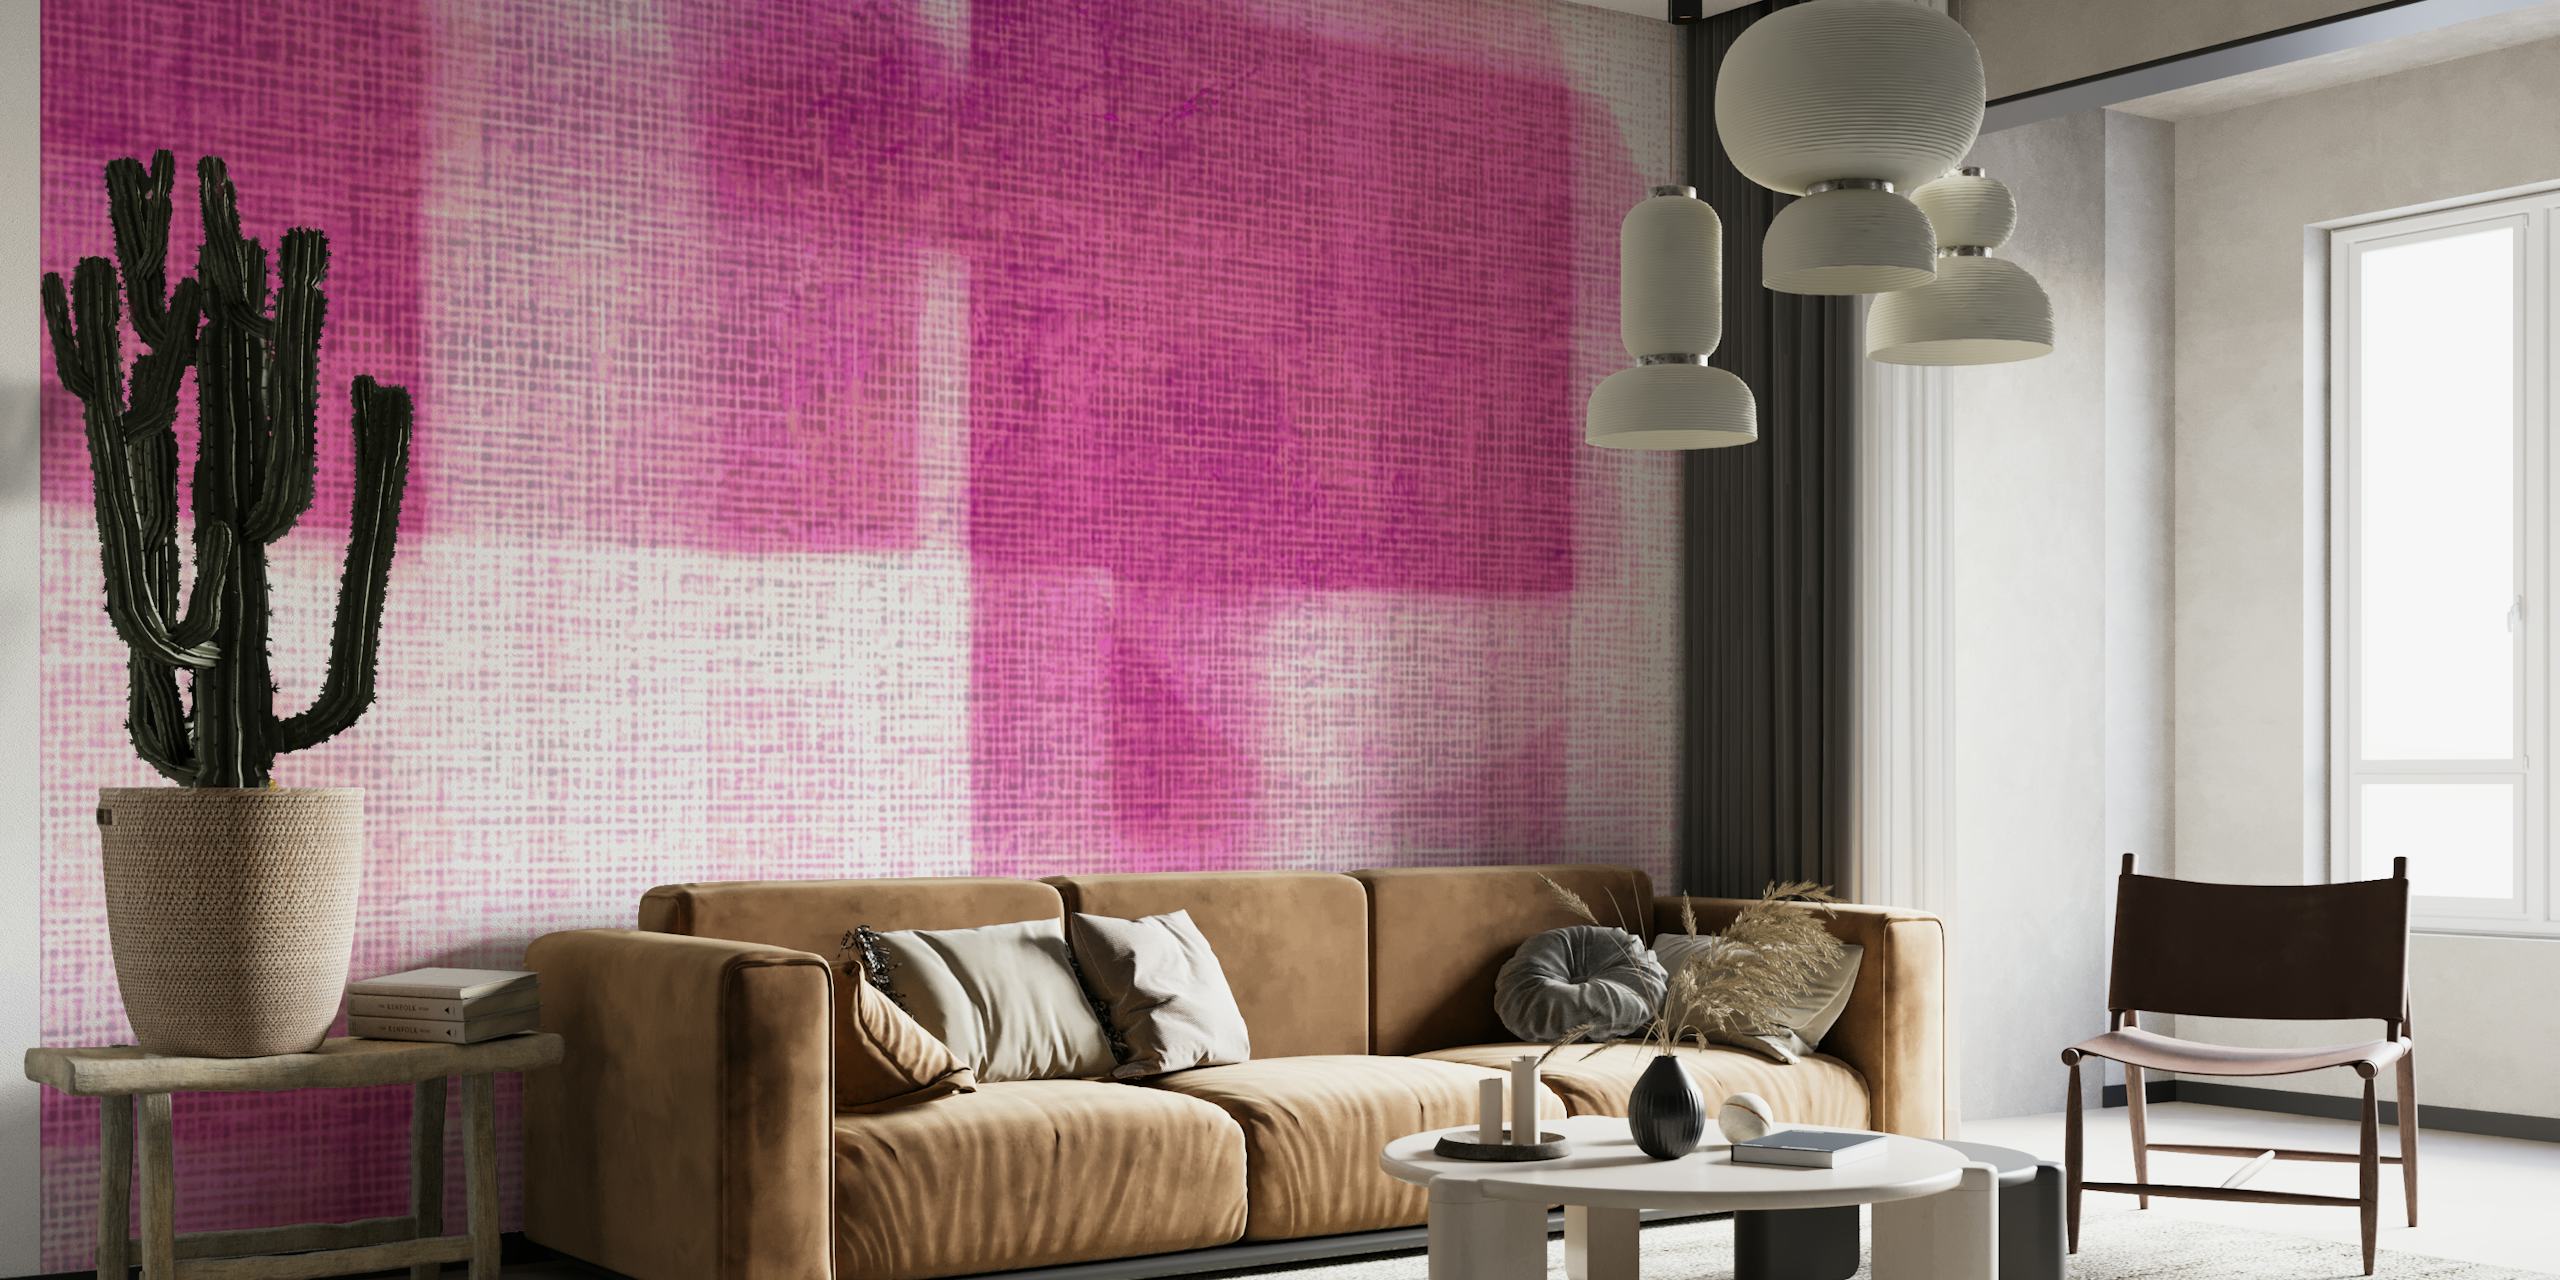 Abstract purple wall mural inspired by Japanese aesthetics